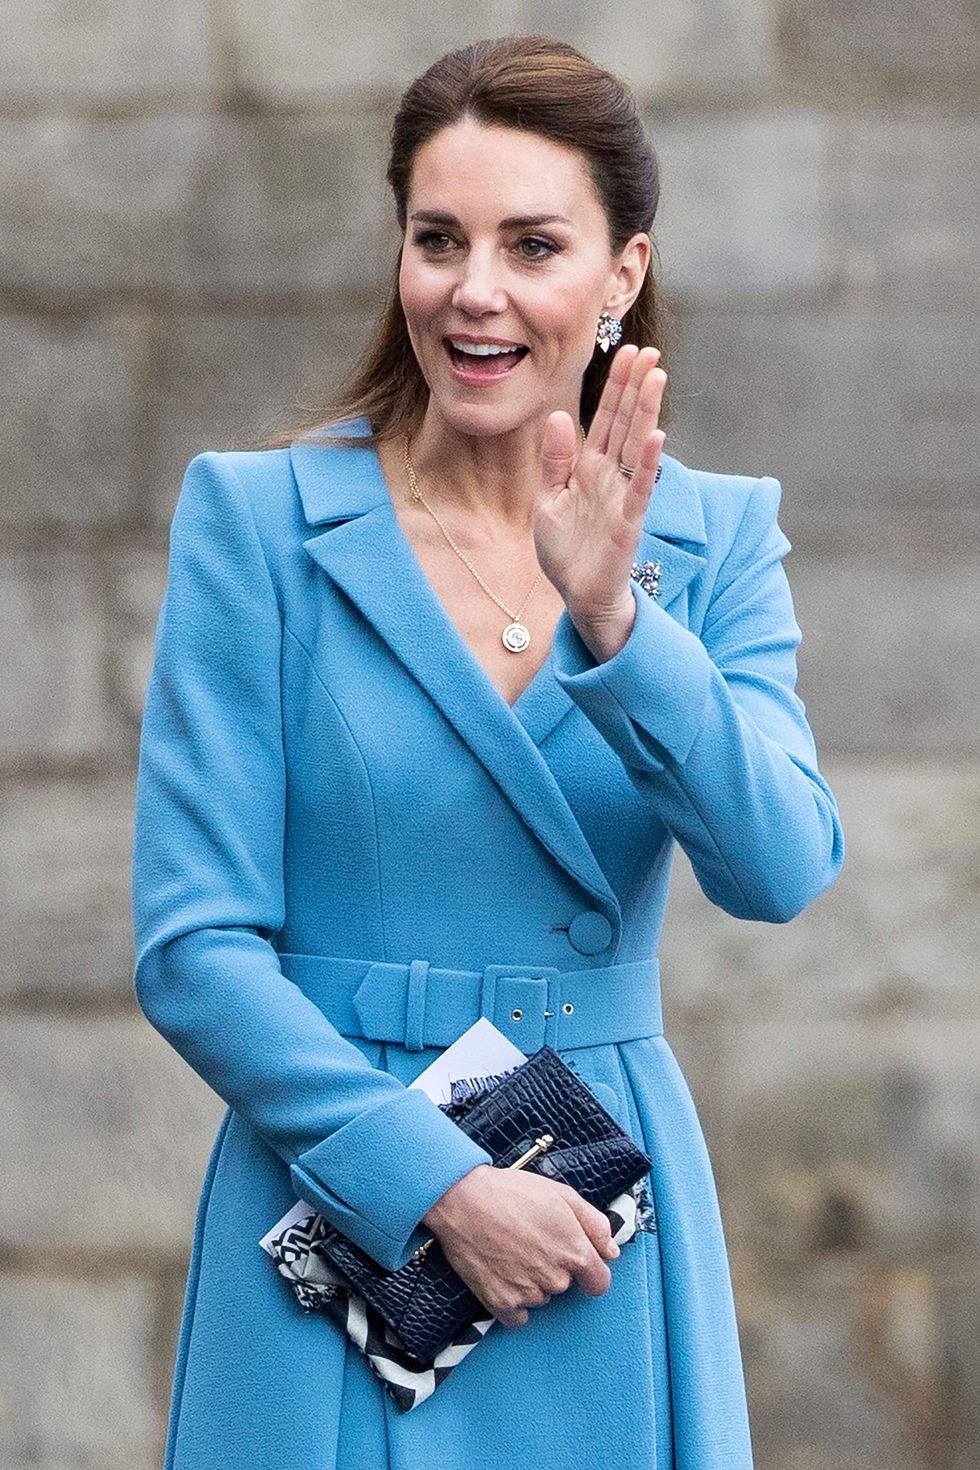 britain's catherine, duchess of cambridge attends a beating retreat by the massed pipes and drums of the combined cadet force in scotland at the palace of holyroodhouse in edinburgh, scotland on may 27, 2021, the final day of their week long visit to the country photo by jane barlow pool afp photo by jane barlowpoolafp via getty images